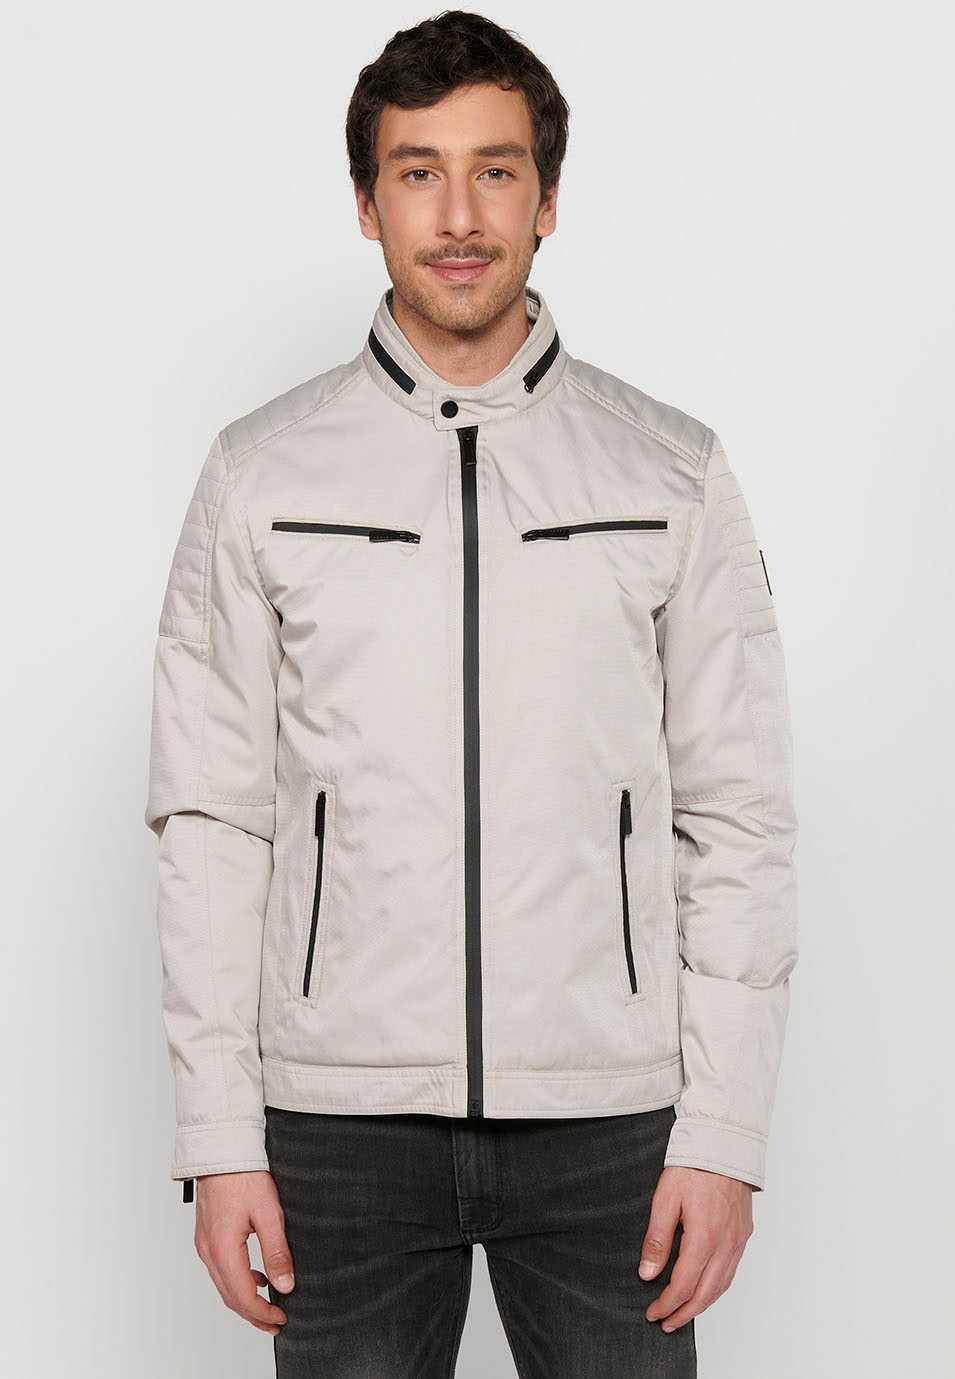 Beige Long-sleeved Jacket with Round Neck and Front Zipper Closure for Men 3